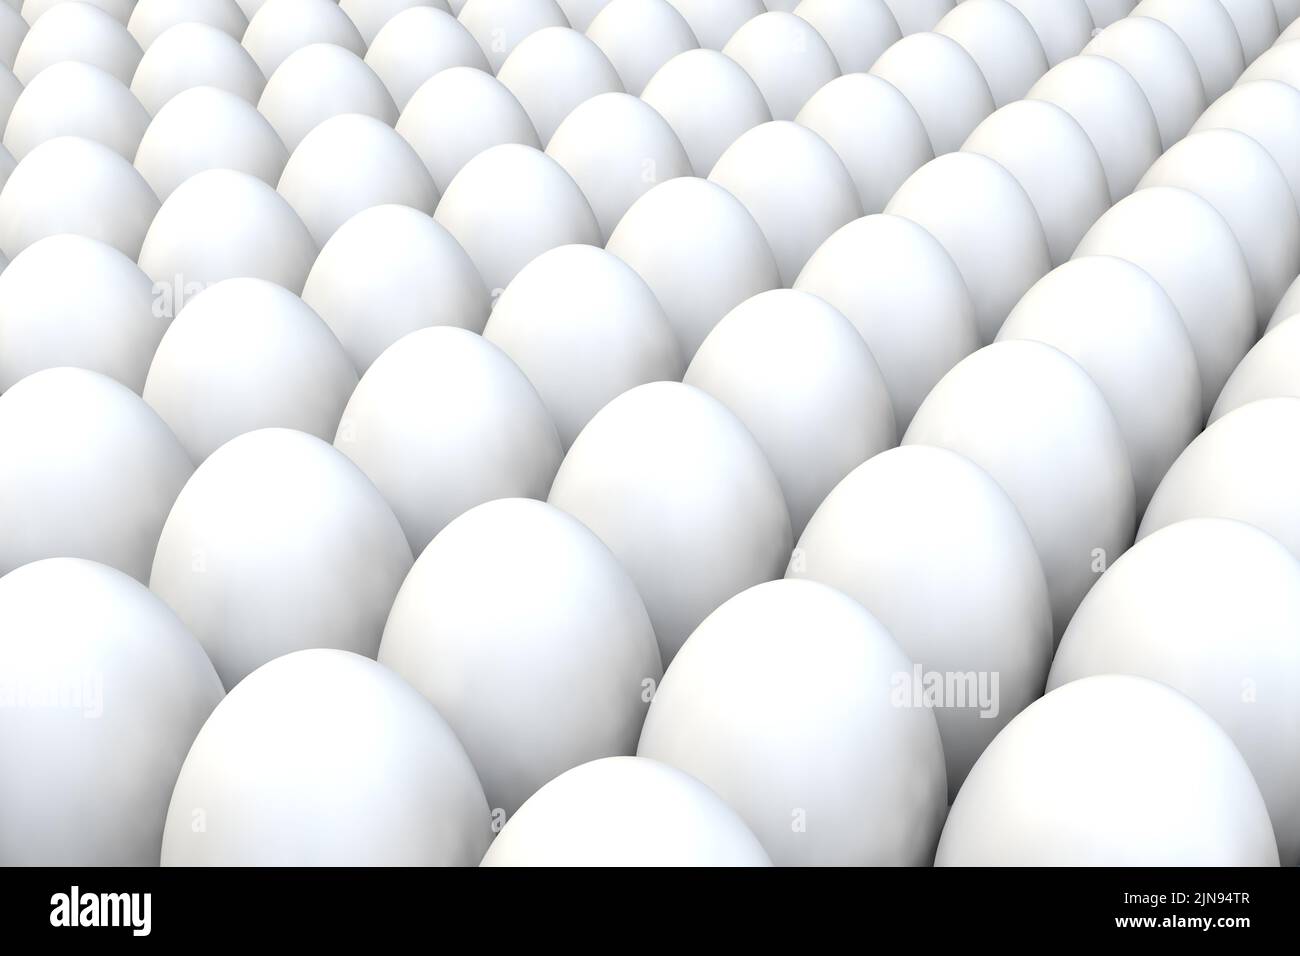 Many chicken eggs. 3d render realistic background. Stock Photo